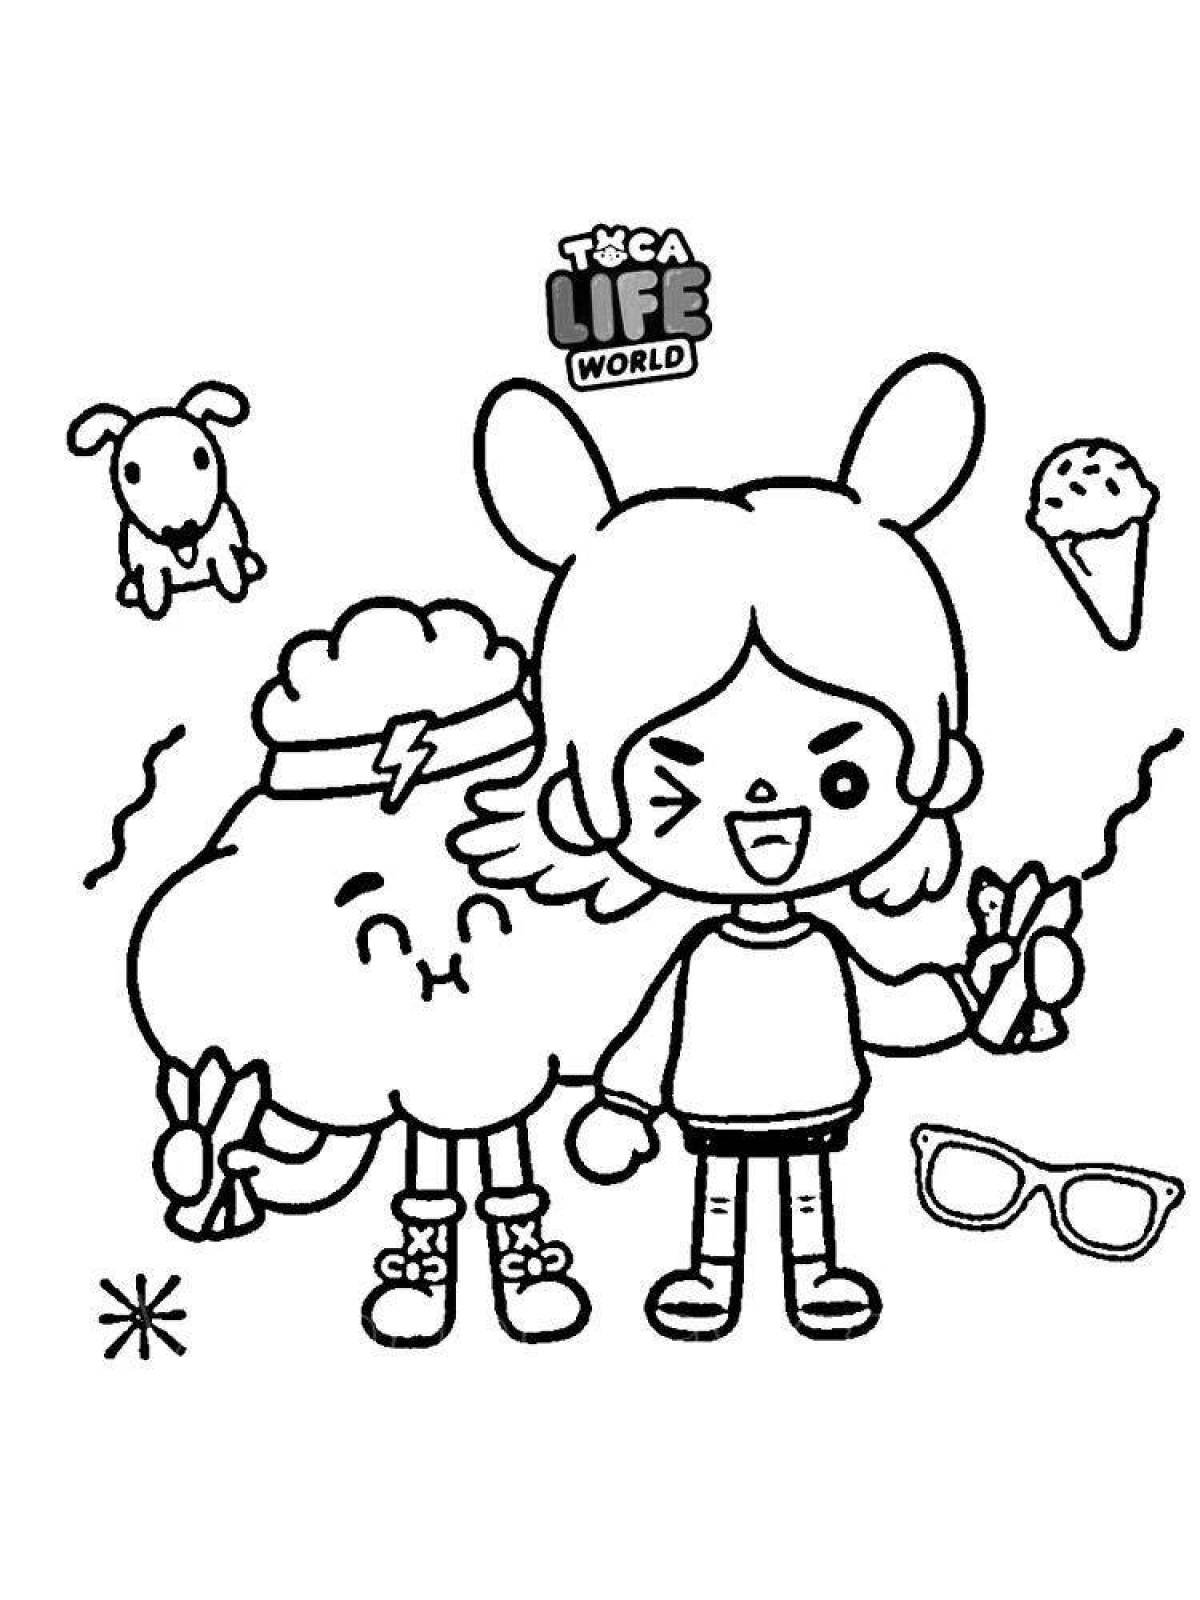 Printout of modern coloring page